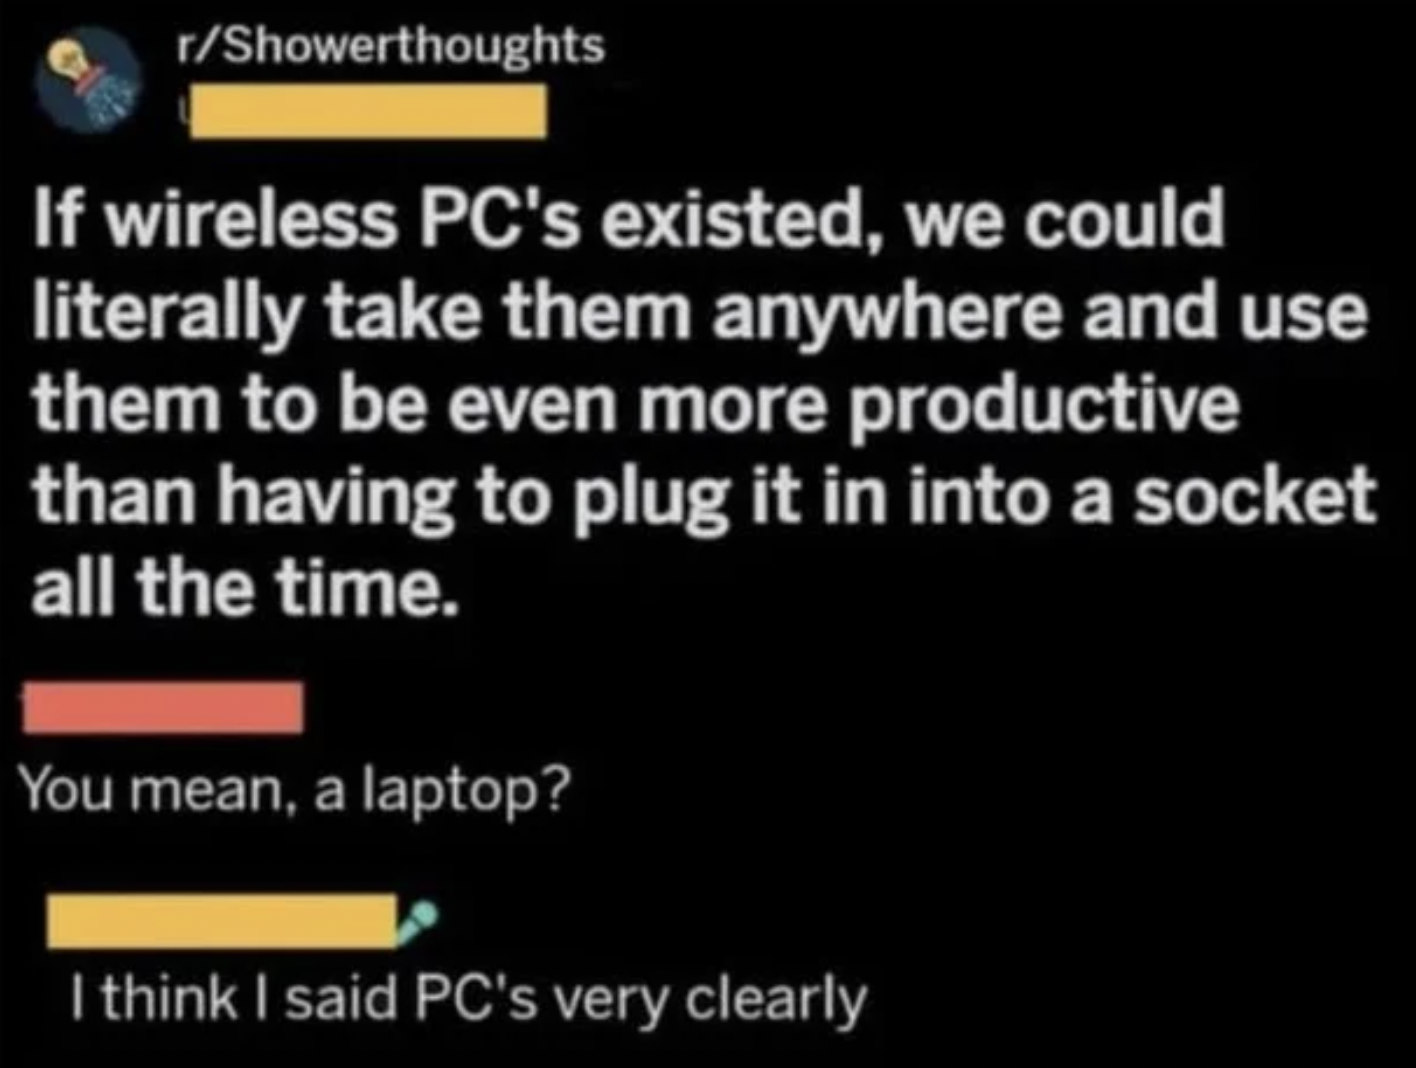 Confidently incorrect people - If wireless Pc's existed, we could literally take them anywhere and use them to be even more productive than having to plug it in into a socket all the time. You mean, a laptop? I think I said Pc's very clearly